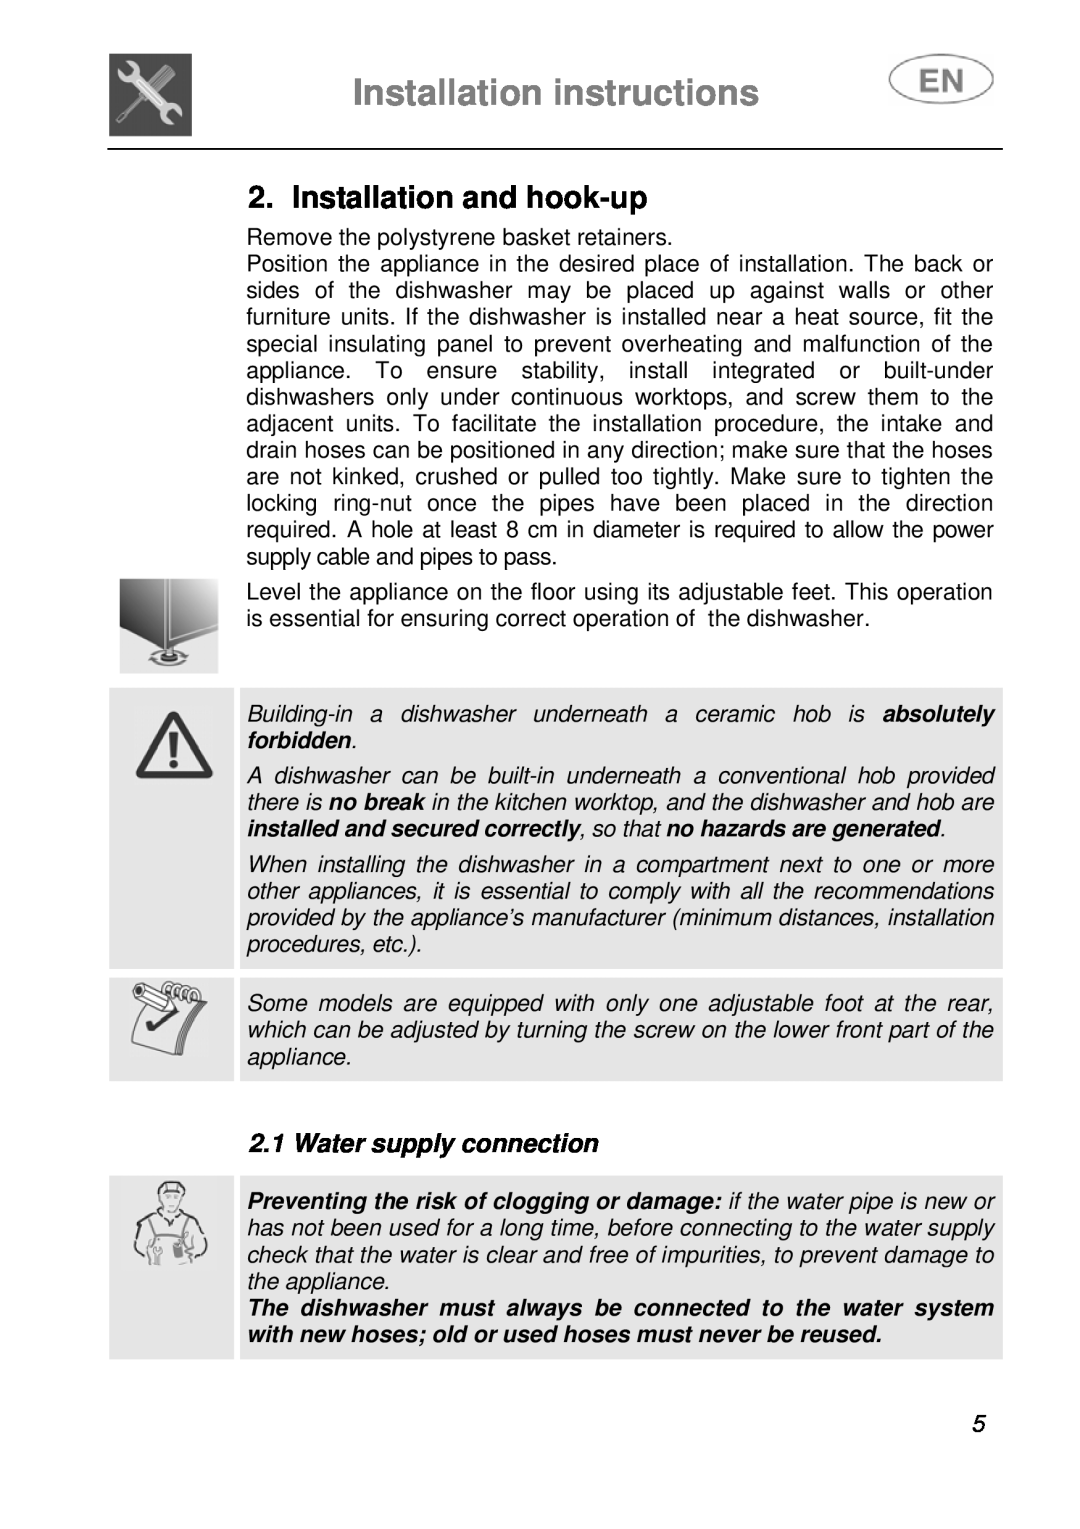 Smeg EN instruction manual Installation instructions, Installation and hook-up, Water supply connection 